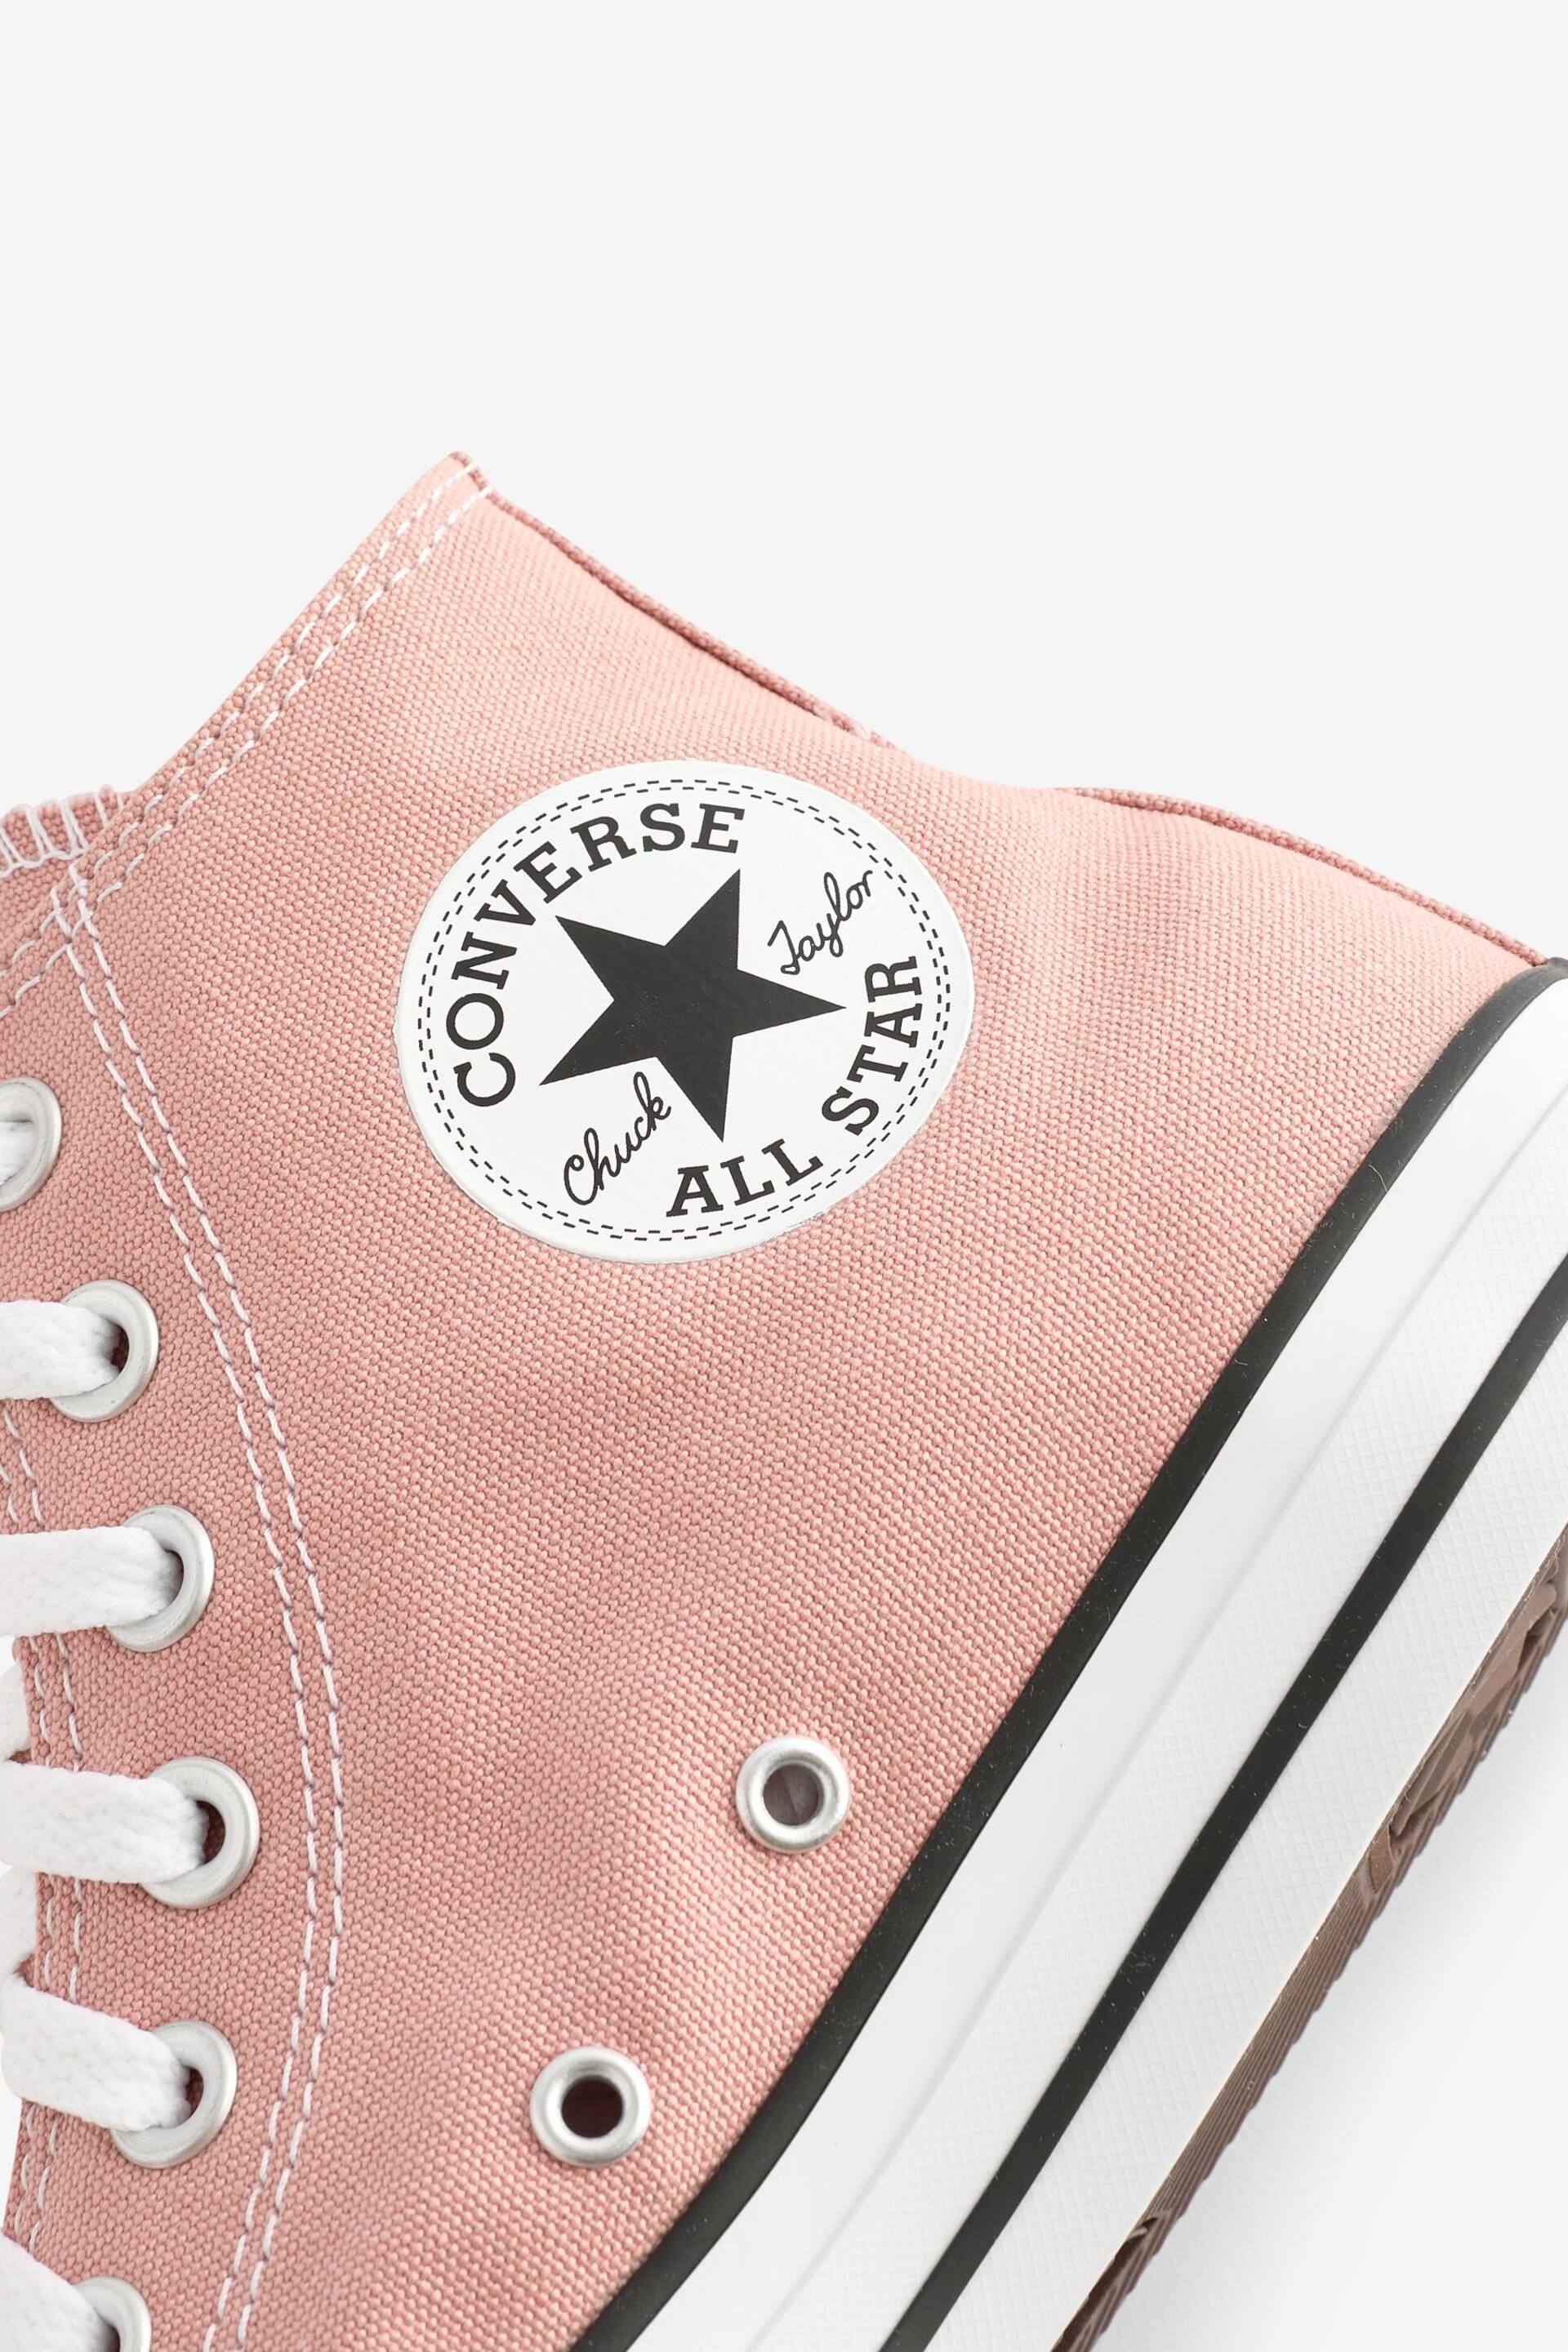 Converse Light Pink Chuck Taylor All Star High Trainers - Image 8 of 9